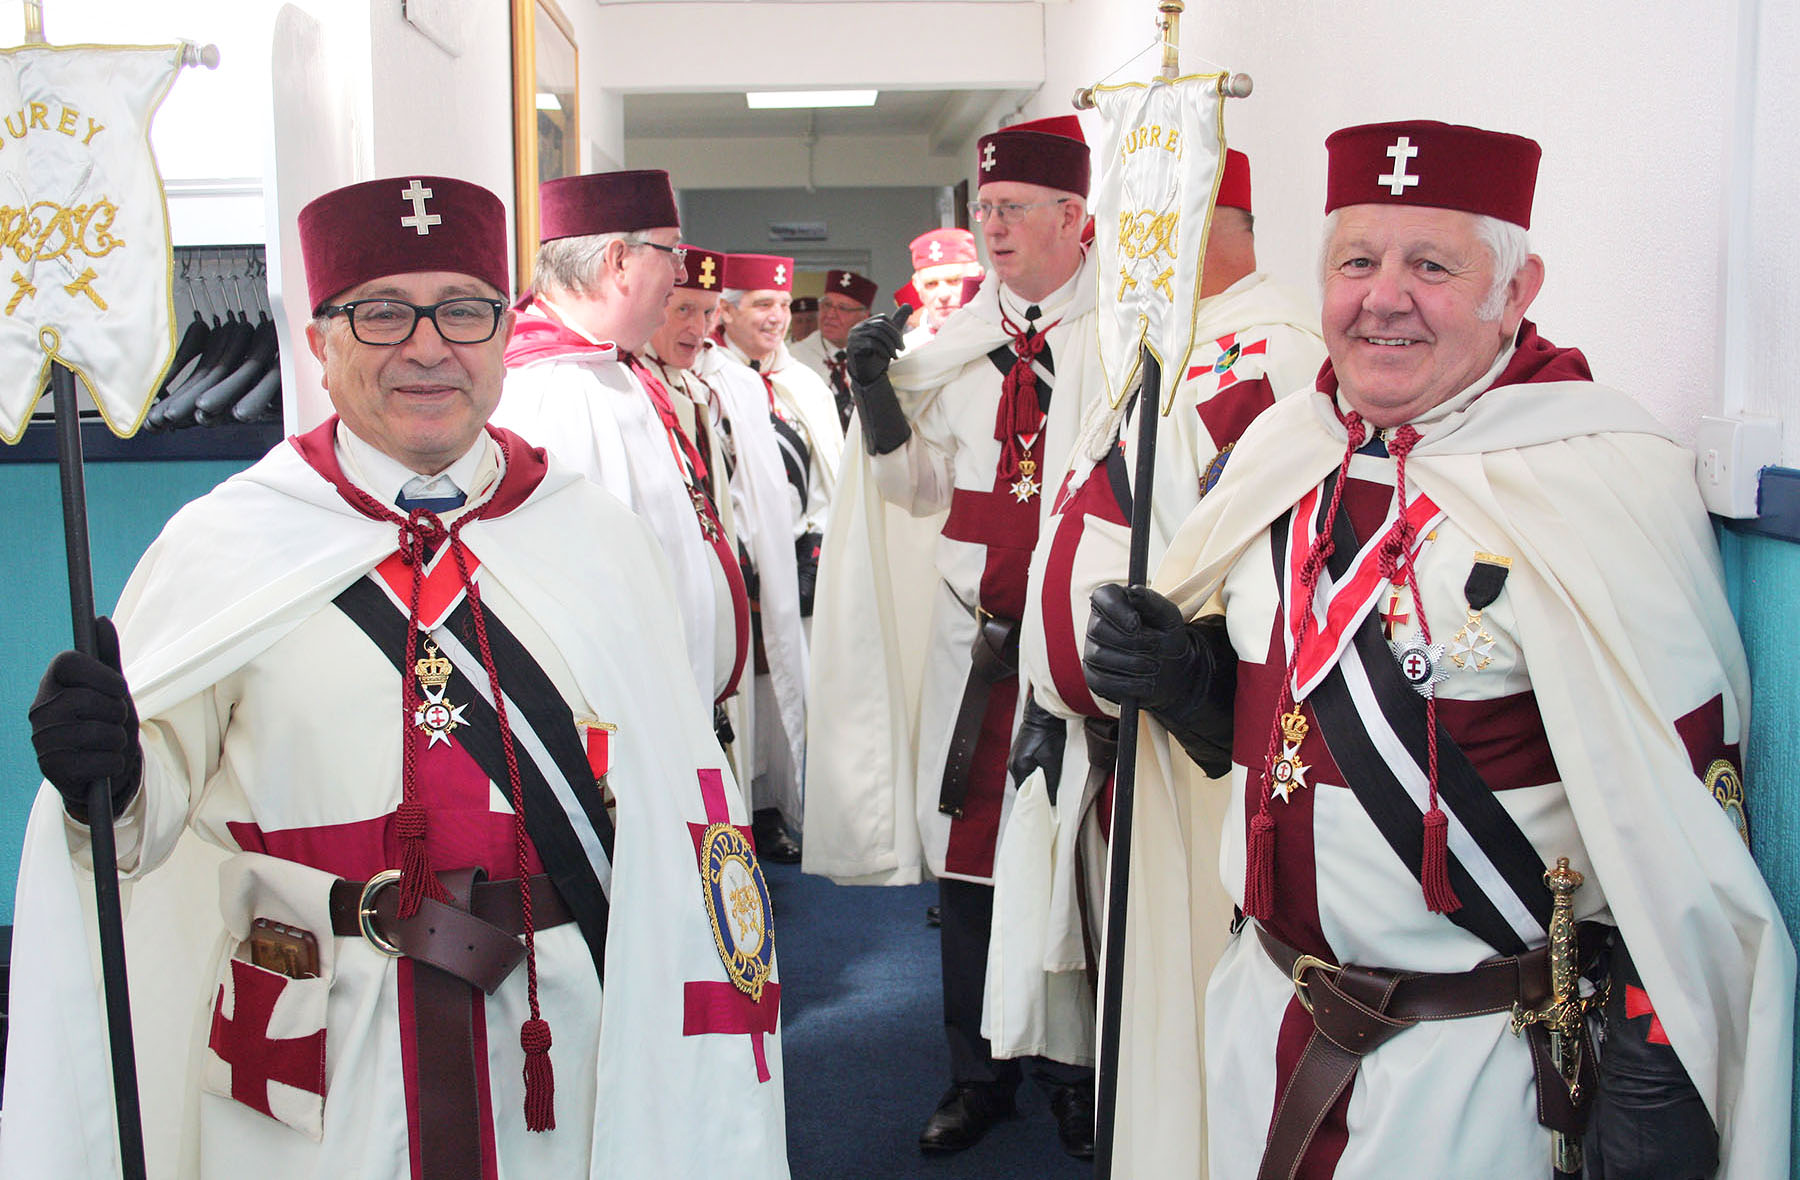 The 2018 Annual Meeting of the Provincial Priory of Surrey